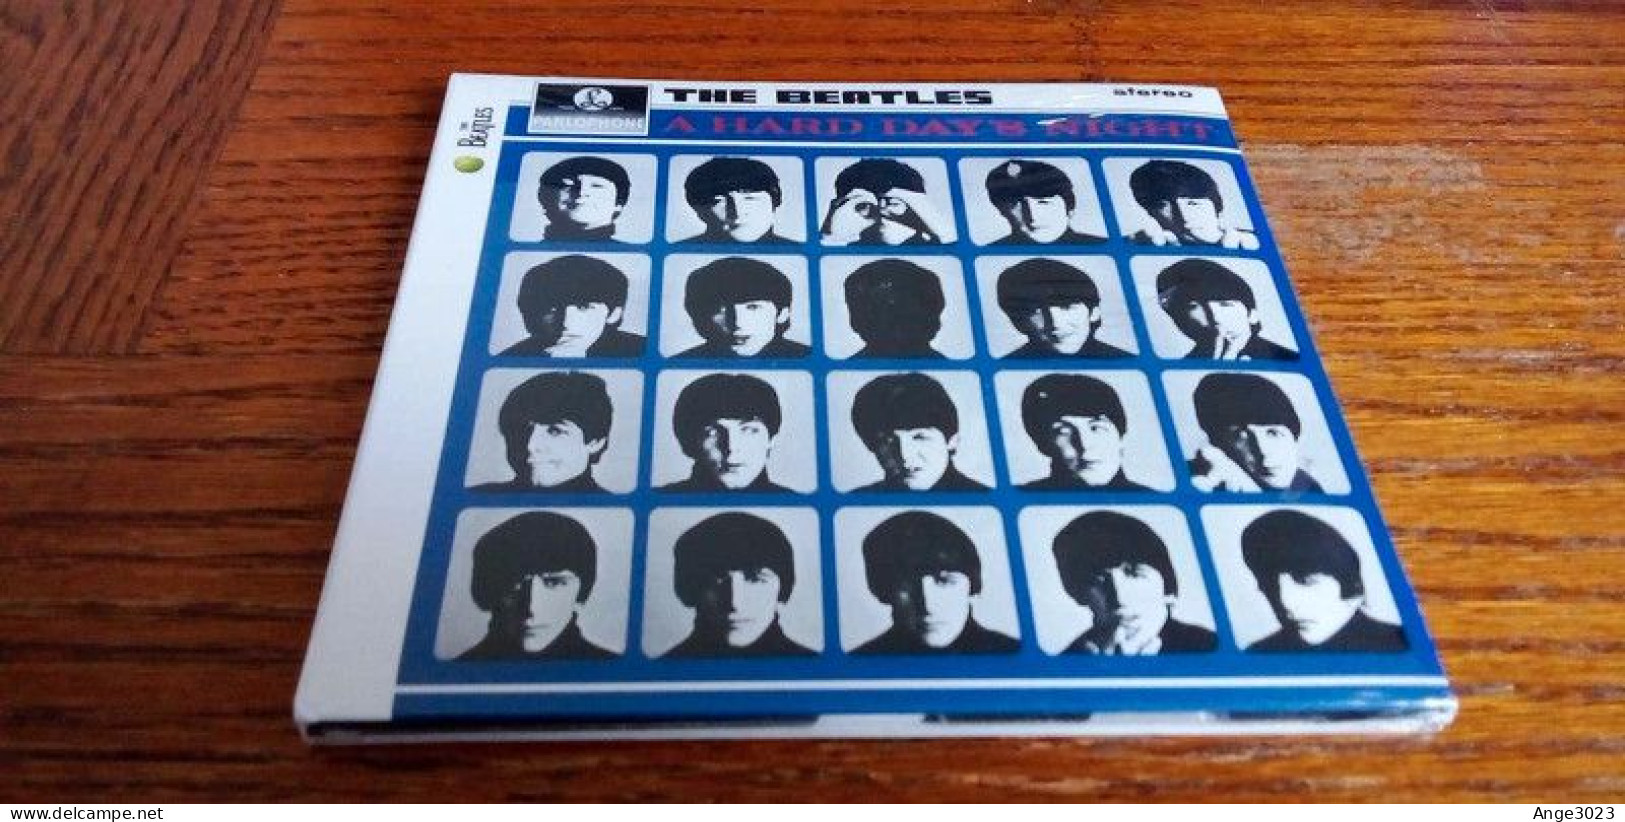 THE BEATLES "A Hard Day's Night" - Rock